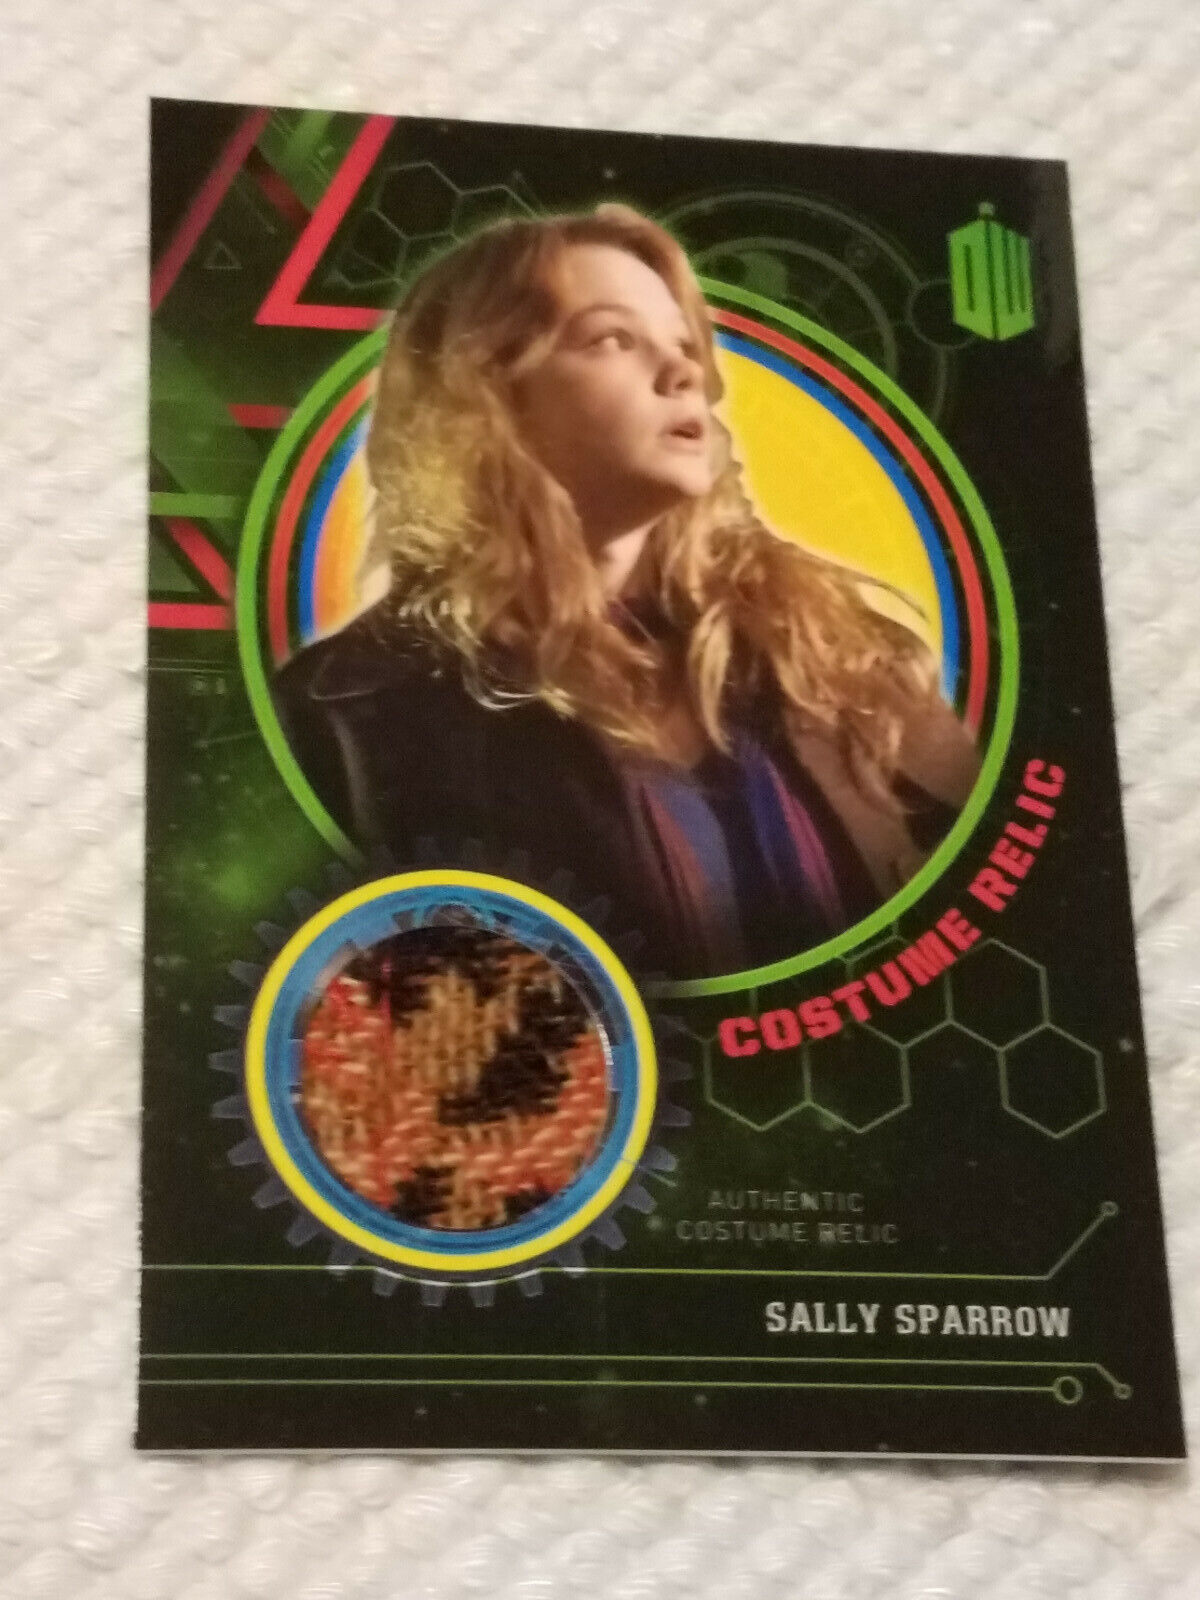  Topps Doctor Who Sally Sparrow green Costume Materials Relic card #'d to/499